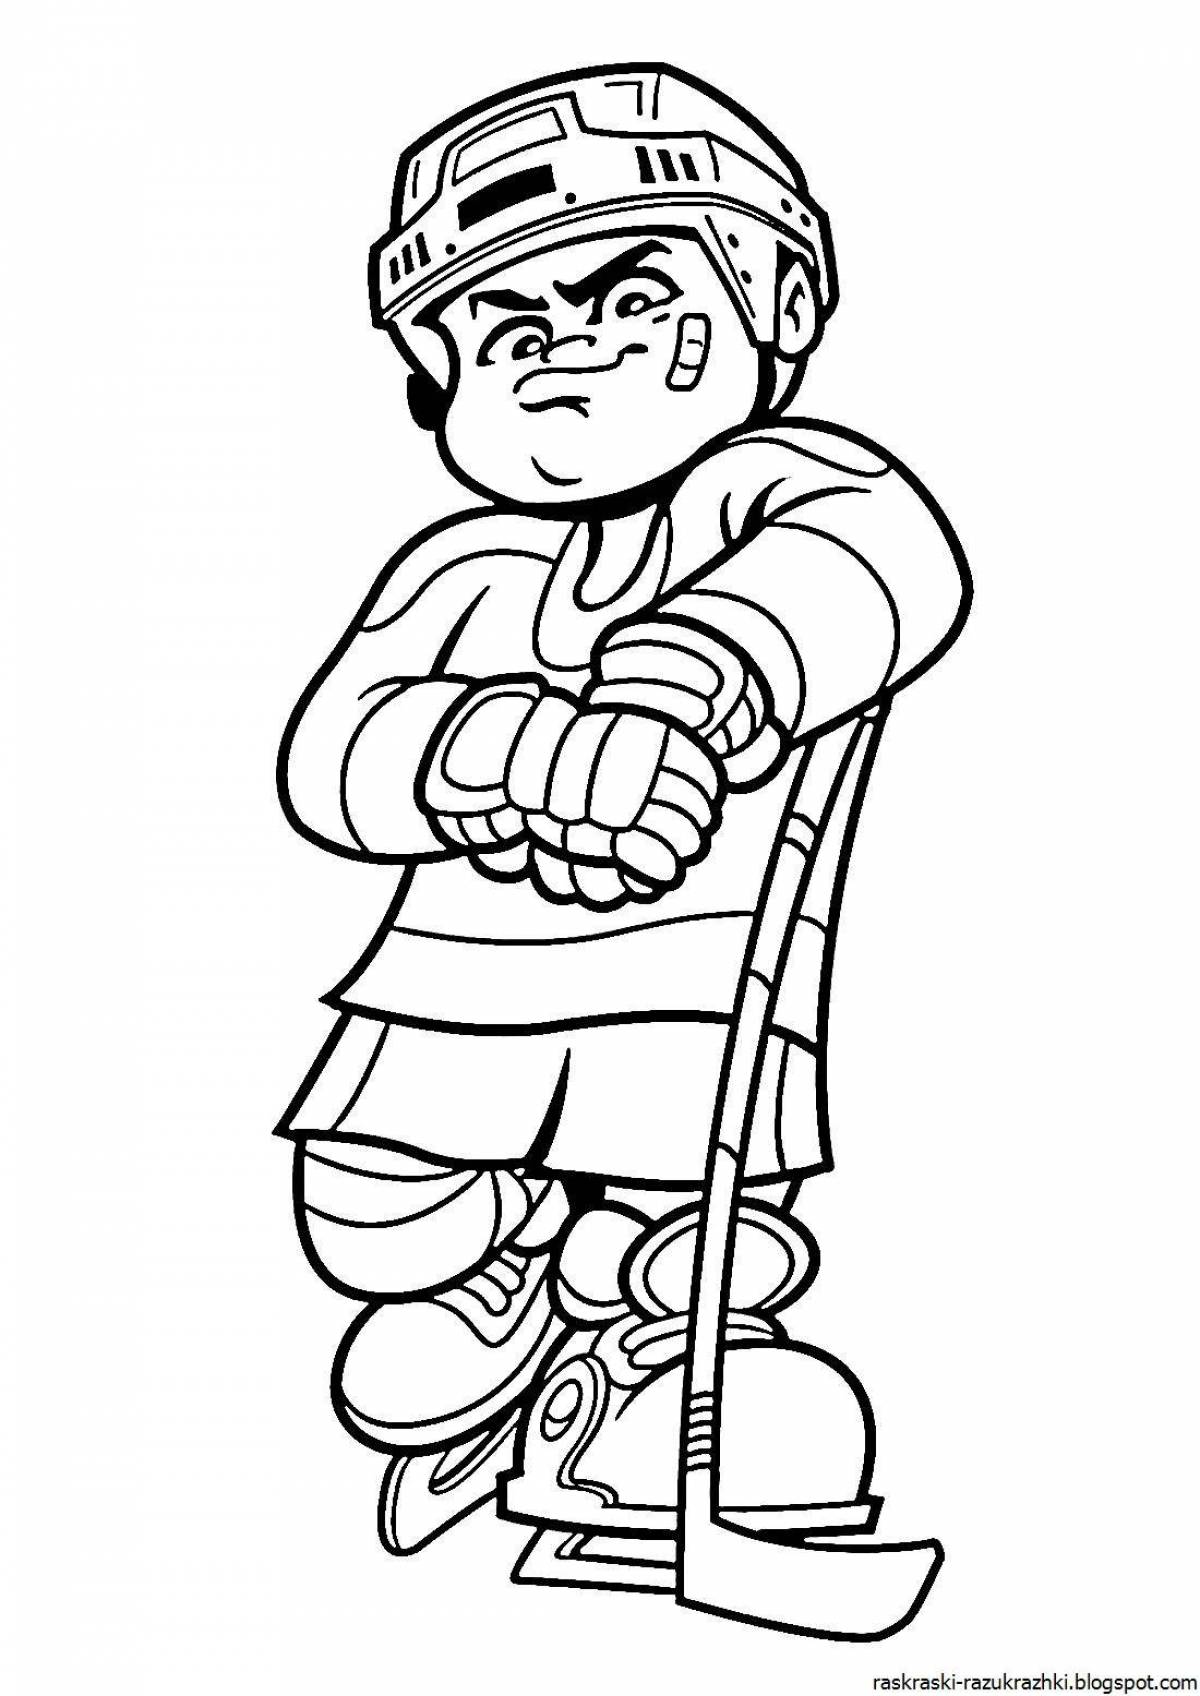 Great hockey player coloring pages for kids